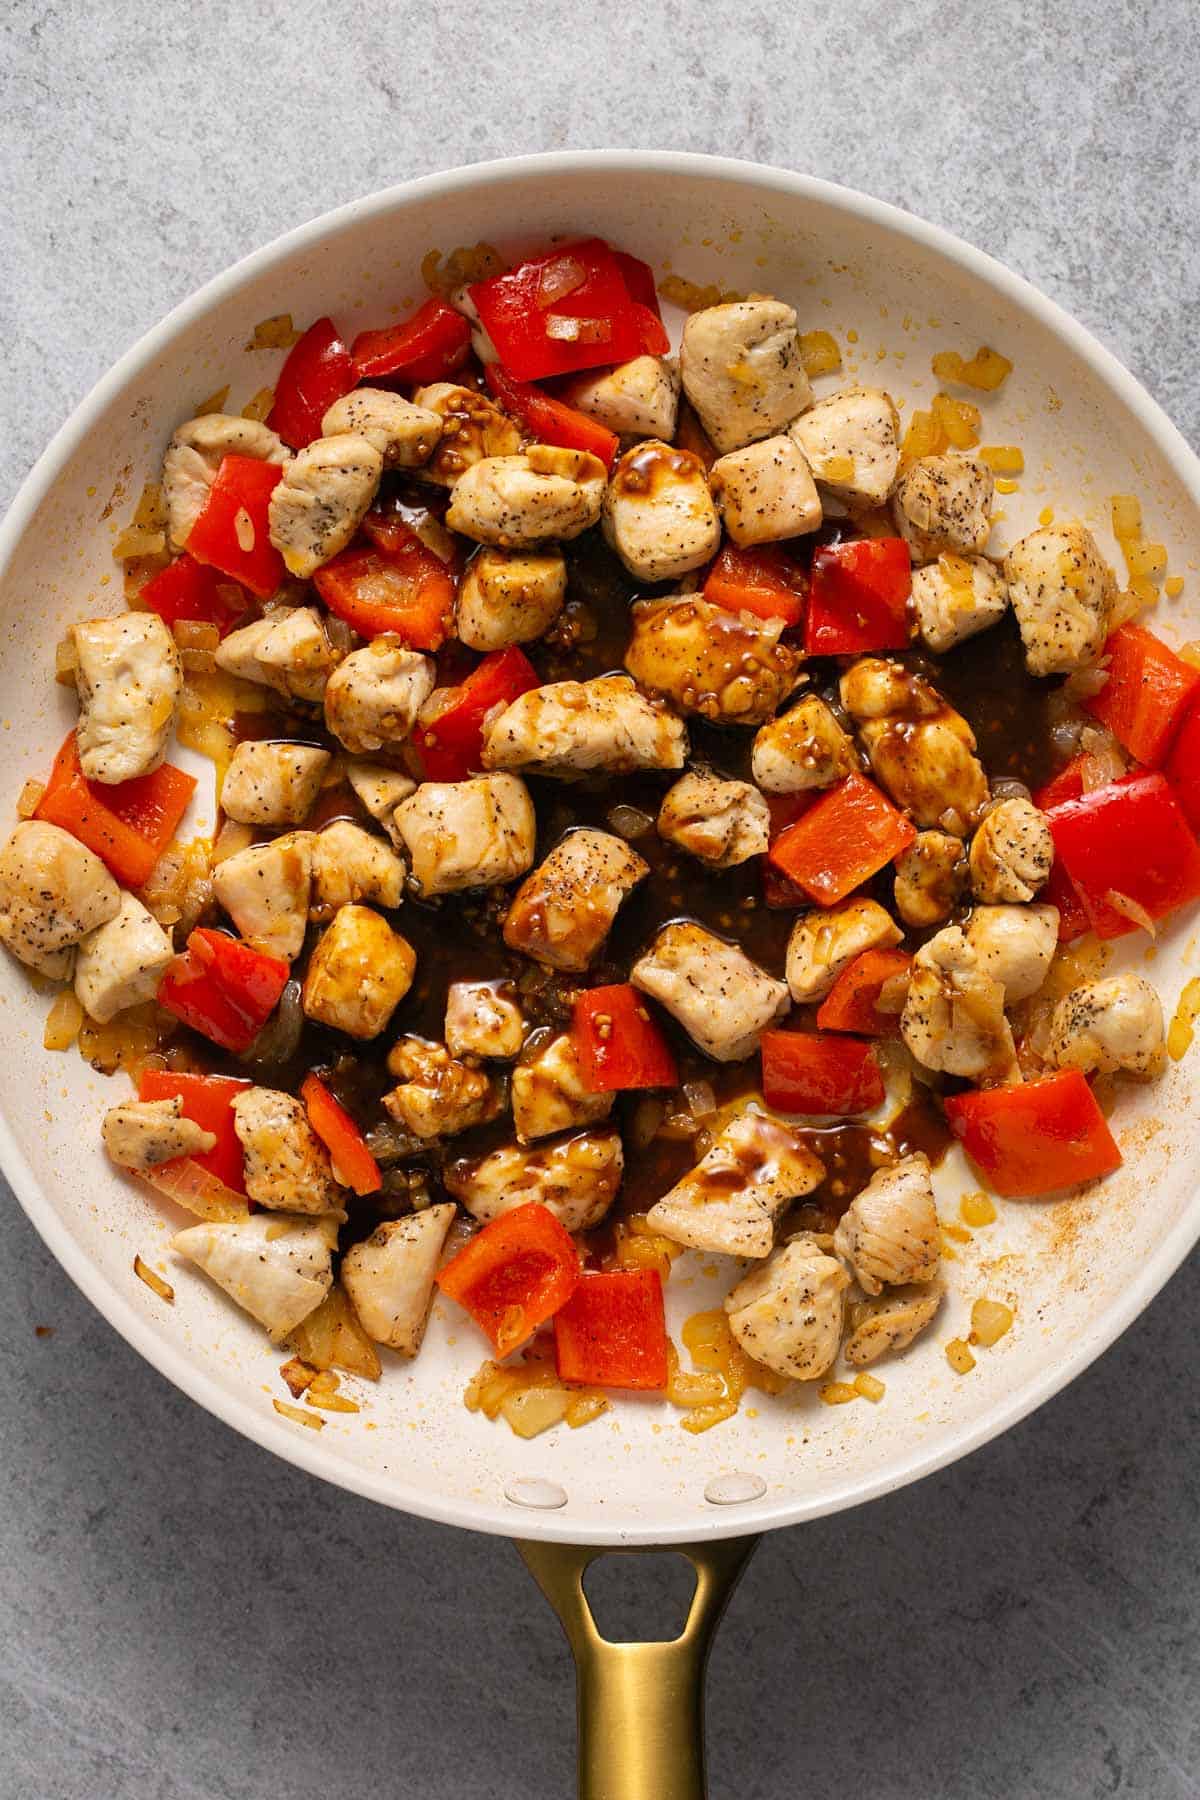 Adding sauce to skillet with chicken and vegetables.